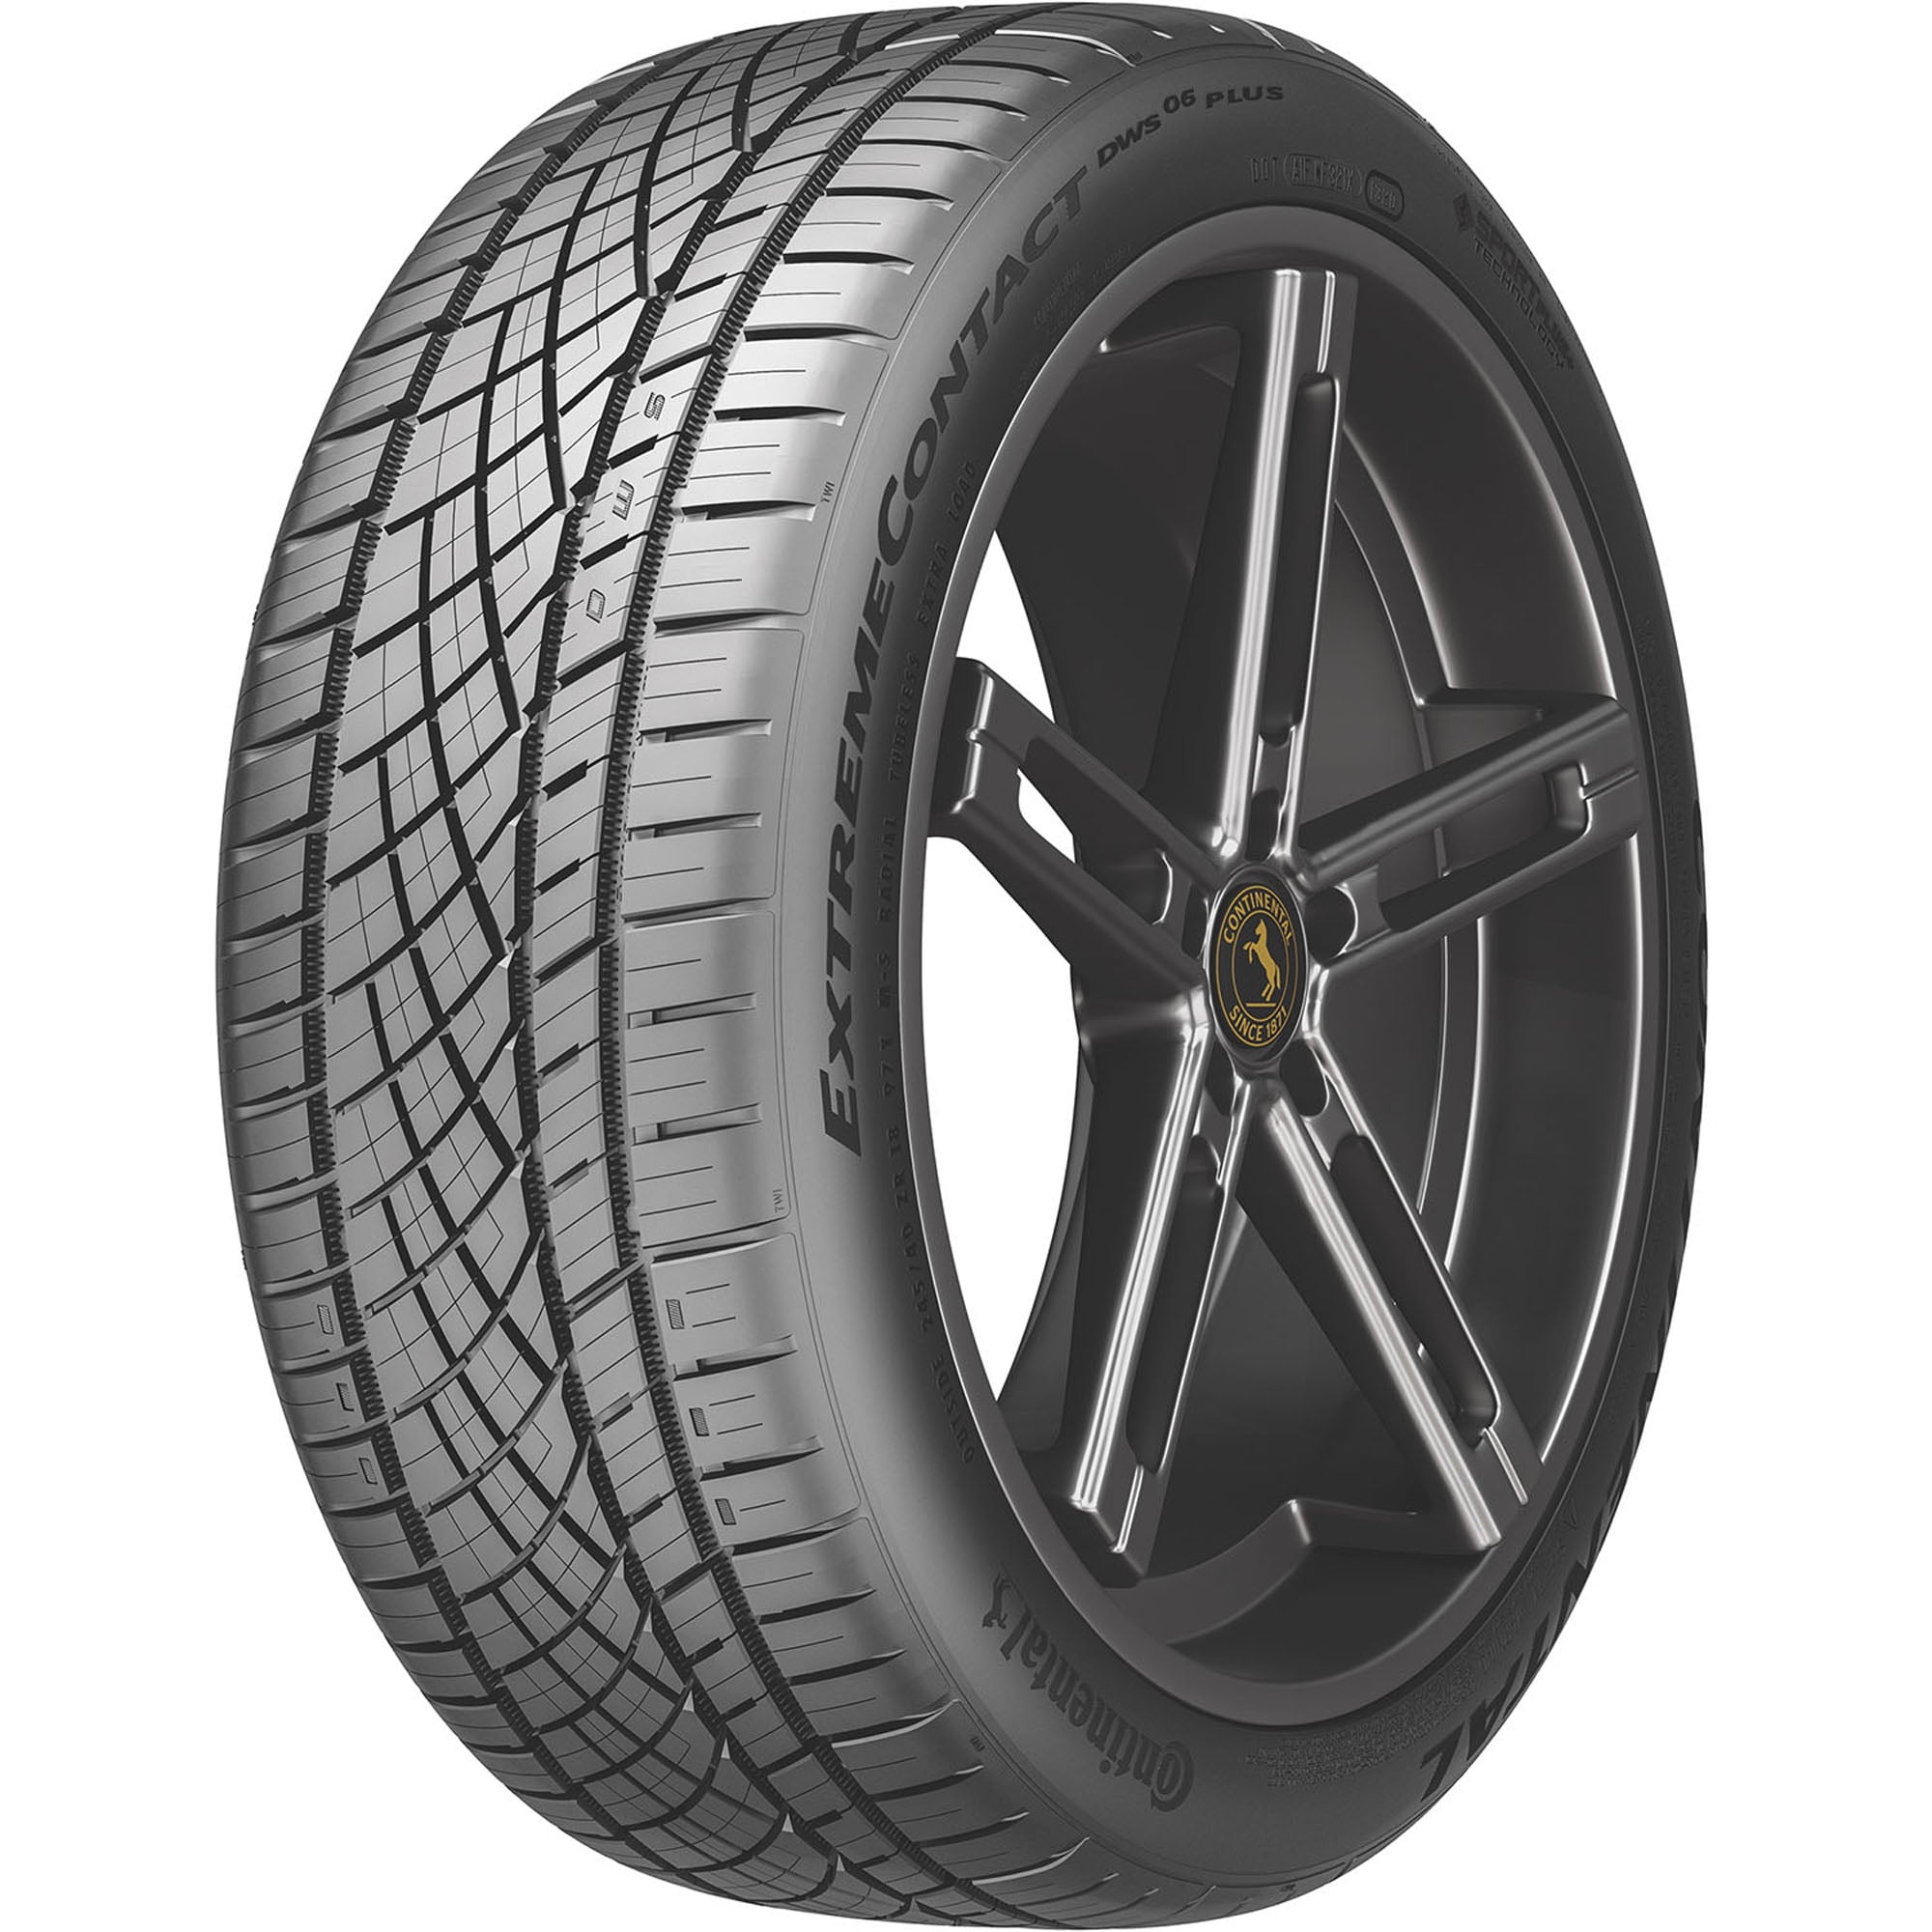 Continental ExtremeContact DWS06 PLUS UHP All Season 225/50ZR16 92W  Passenger Tire